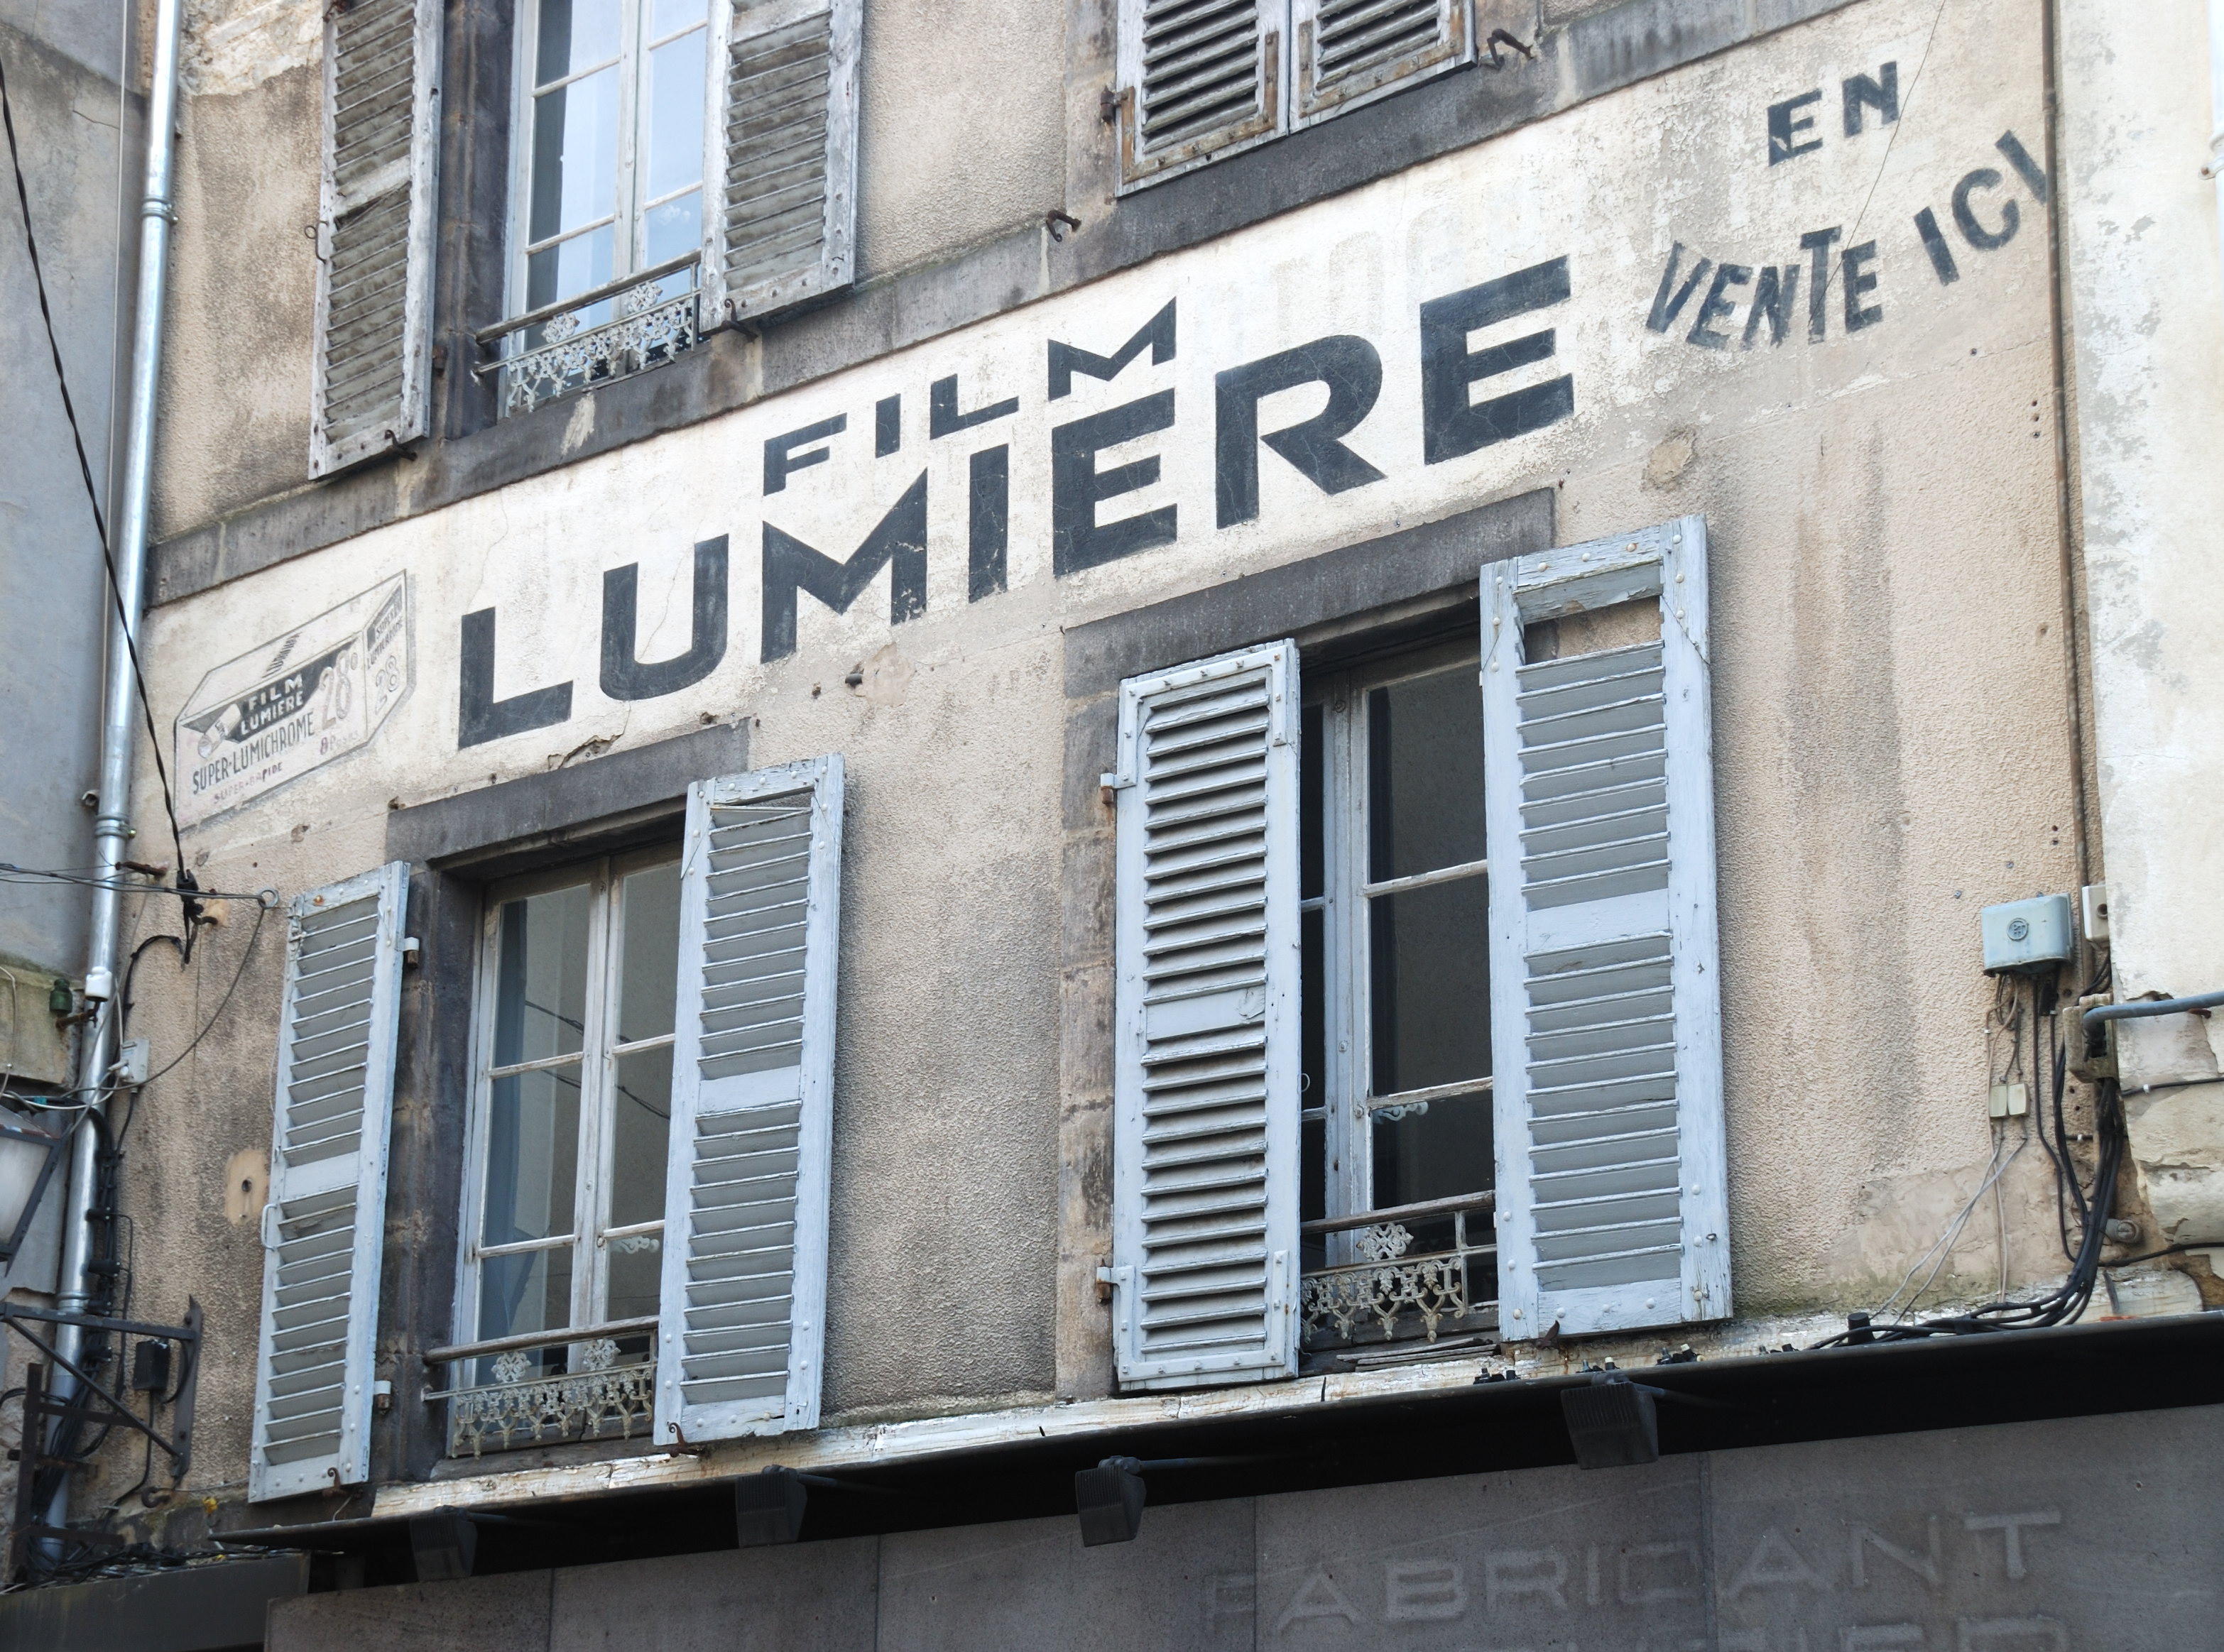 Thiers Lumiere